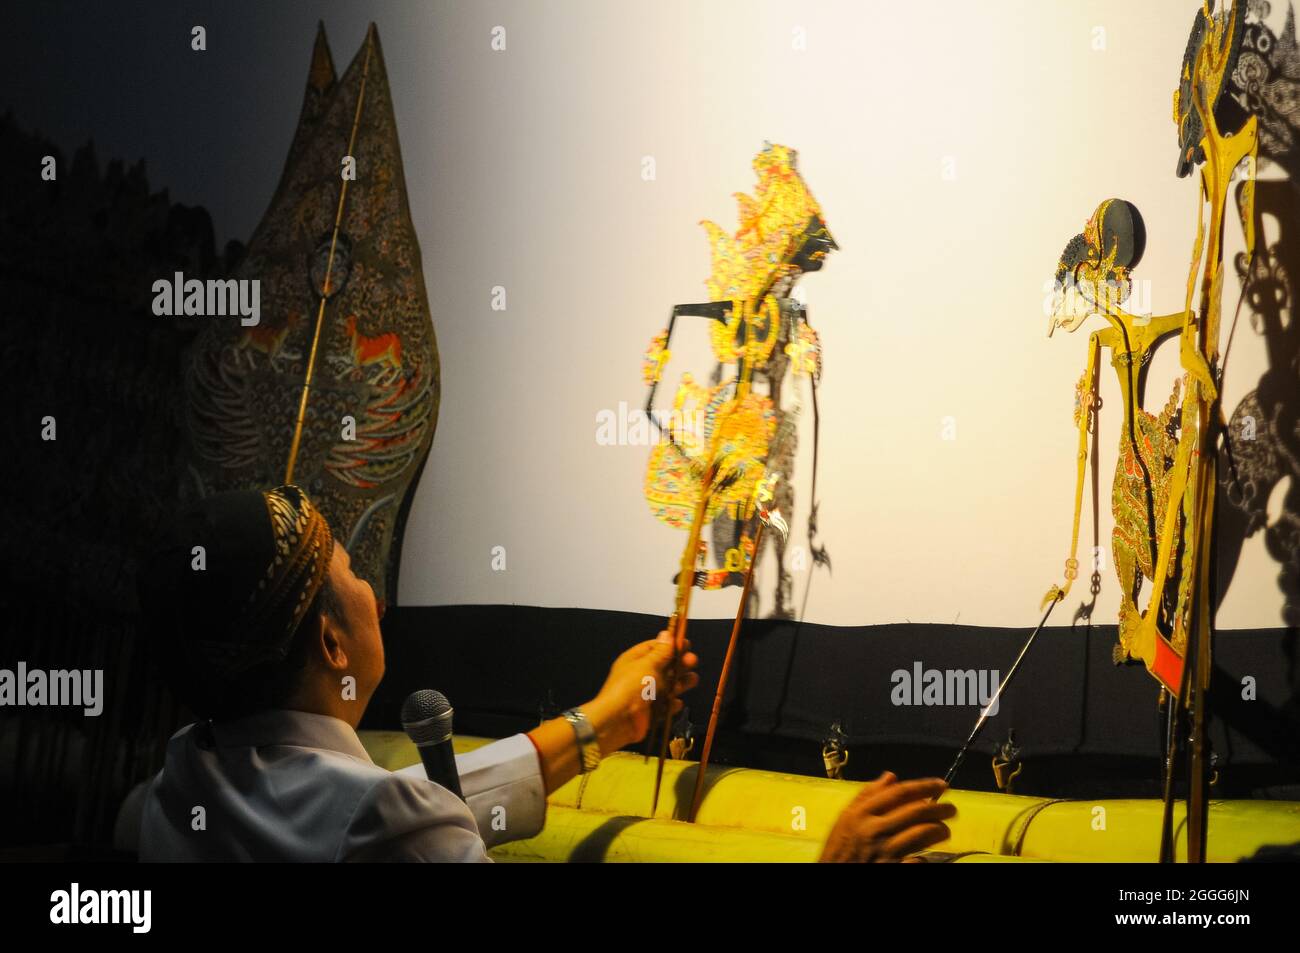 Wayang kulit show from the Java area. In Indonesia, there are several regions that have wayang kulit art with their own characteristics. Stock Photo